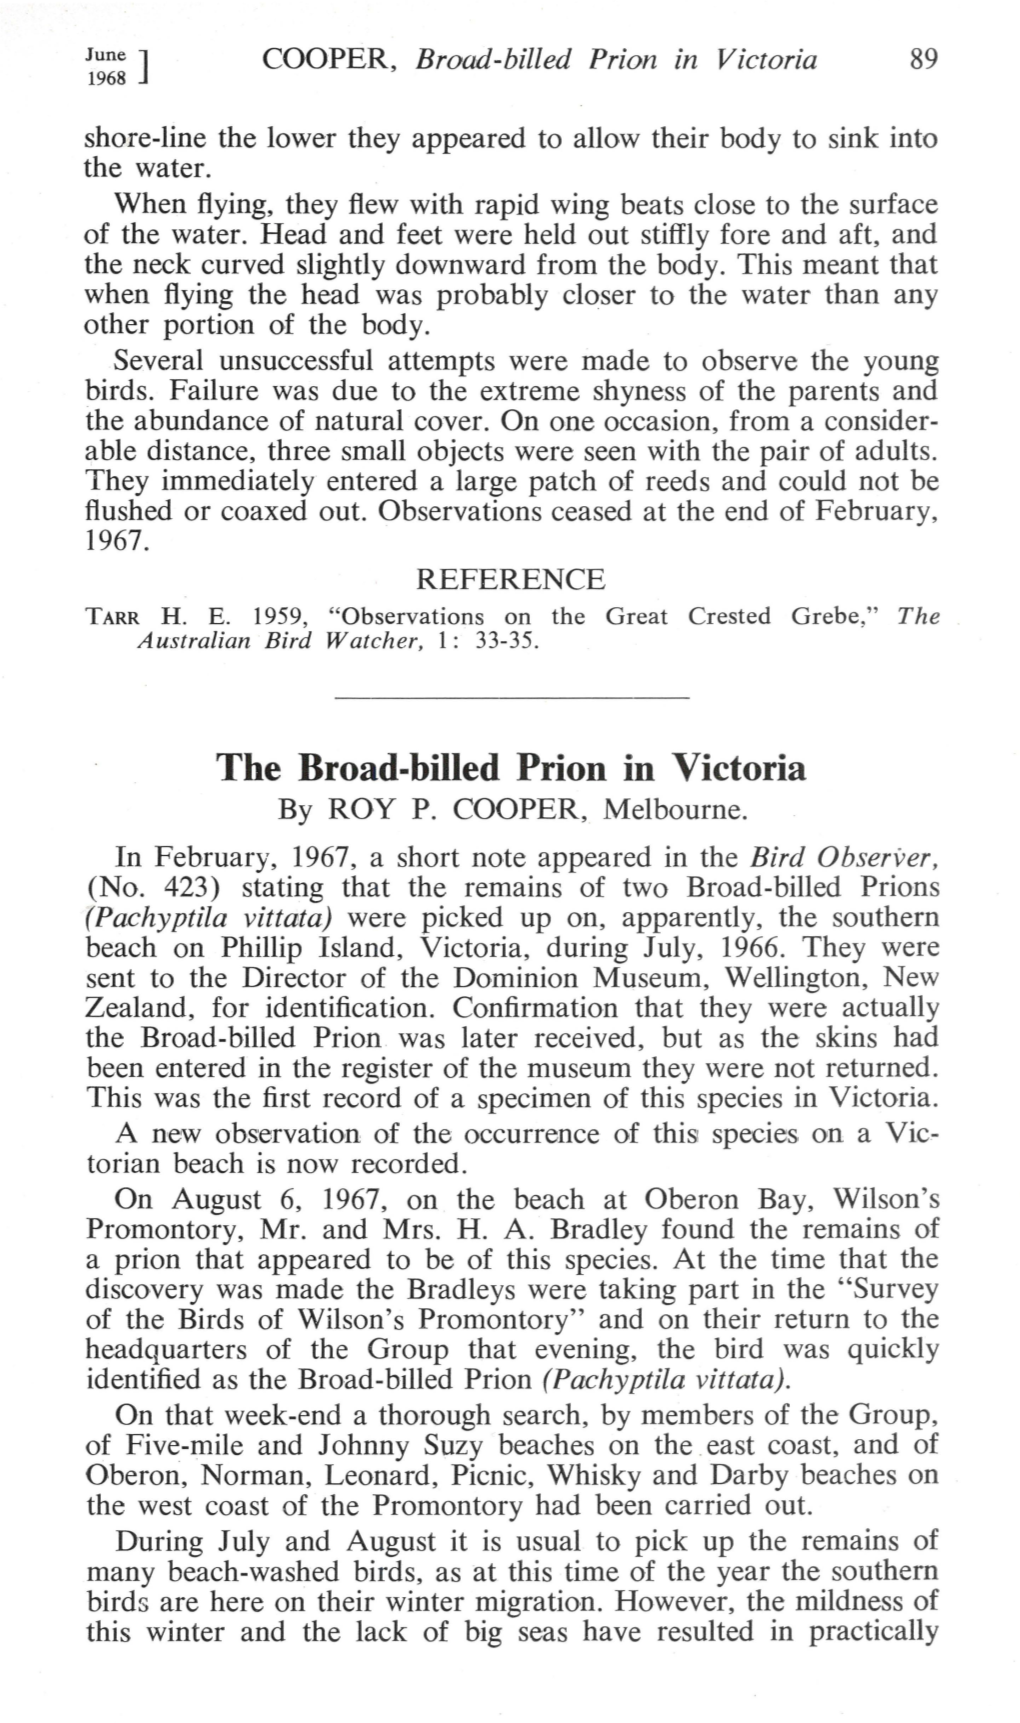 The Broad-Billed Prion in Victoria by ROY P